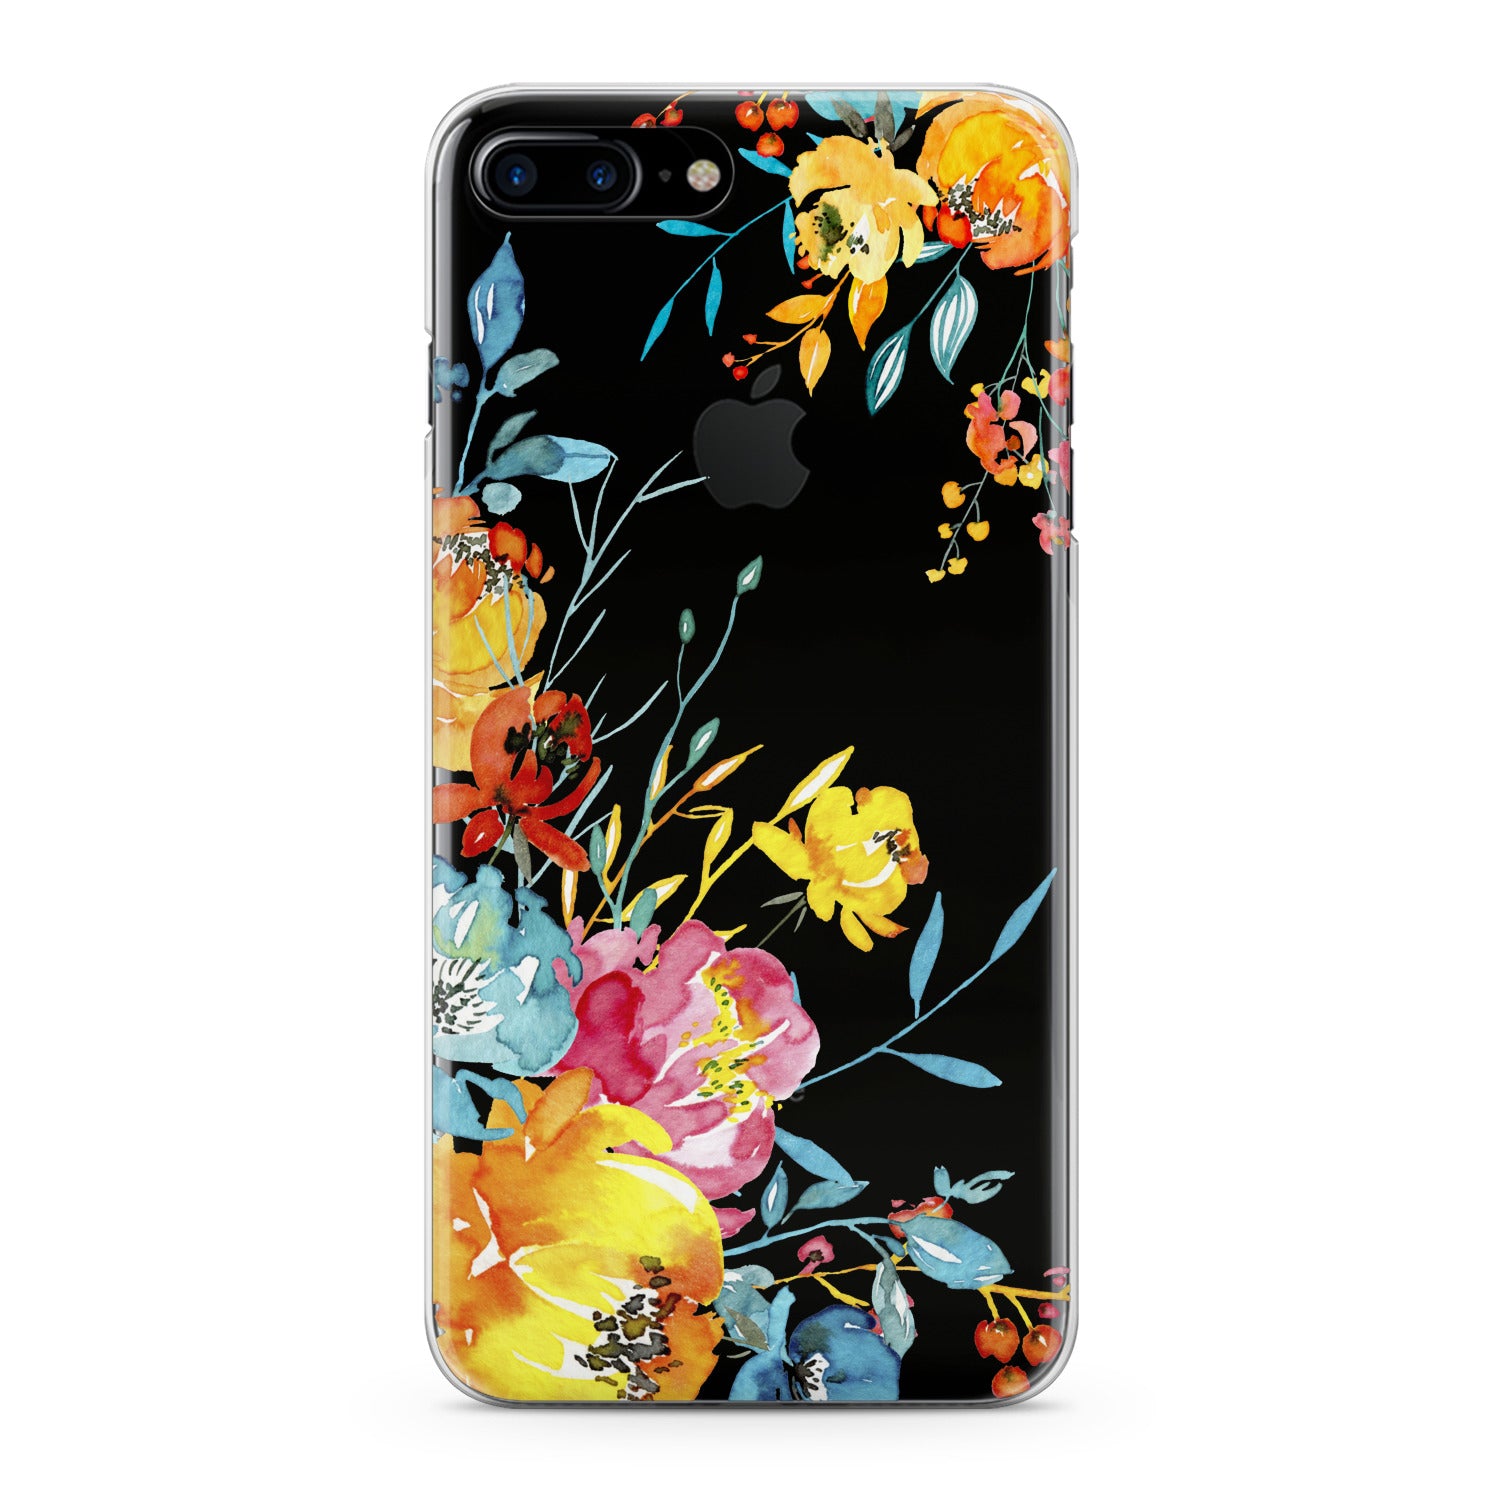 Lex Altern Watercolor Flowers Print Phone Case for your iPhone & Android phone.